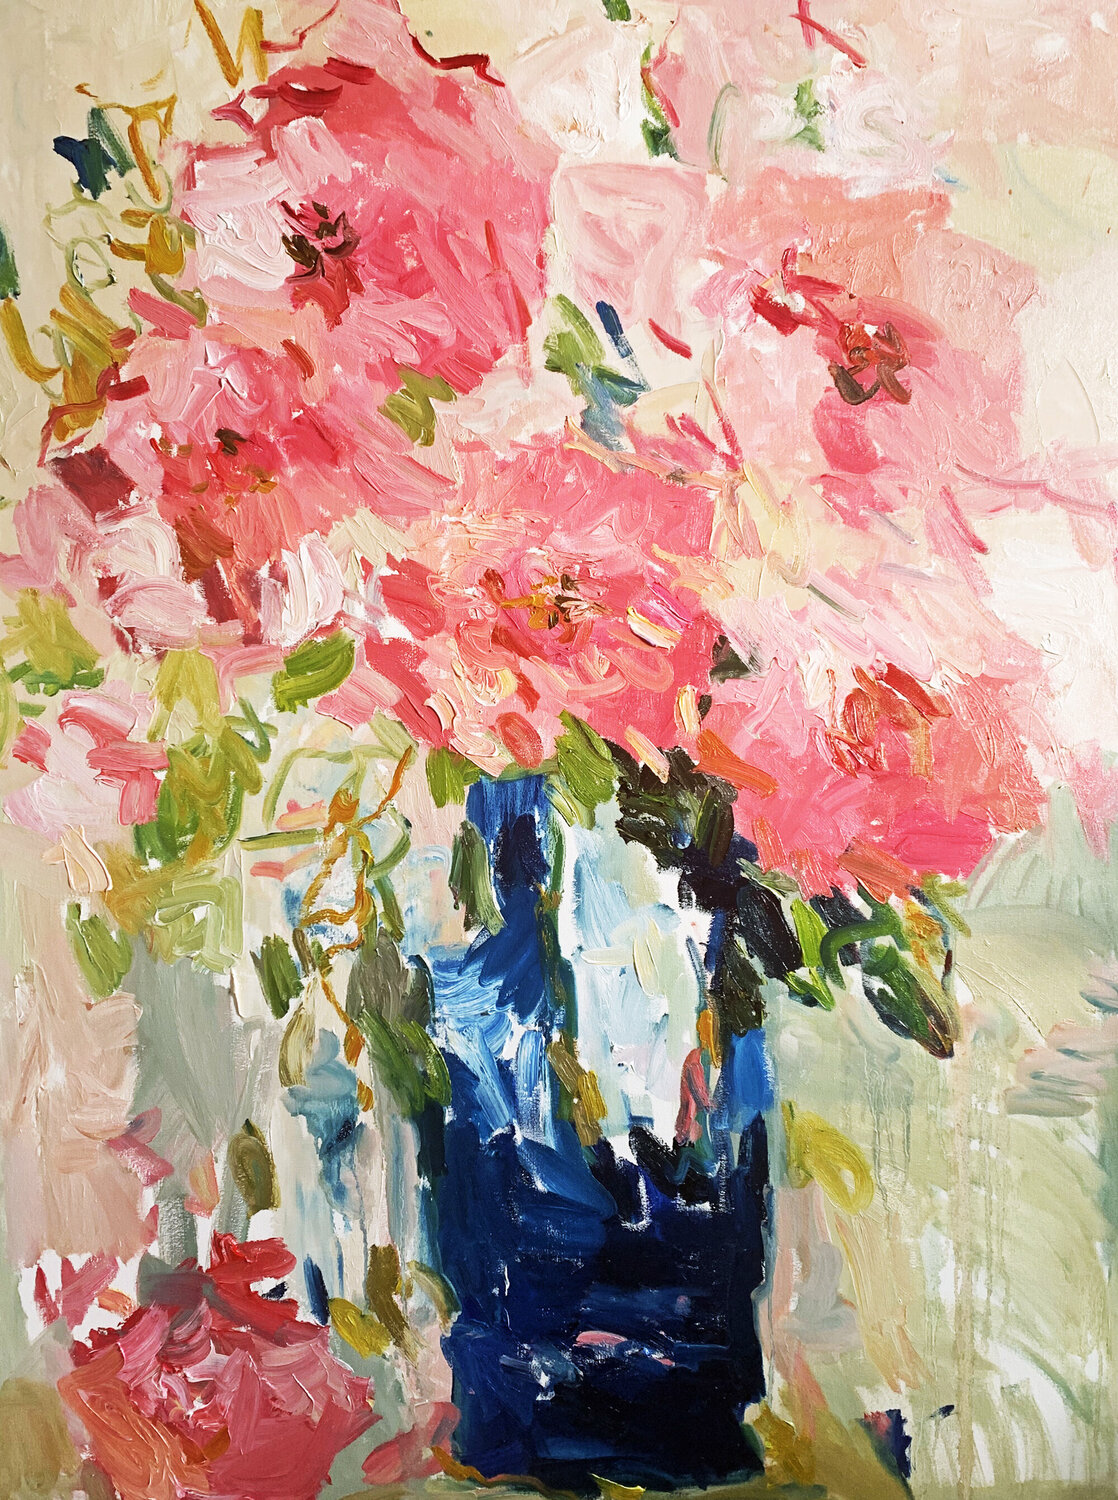 A song of roses. by Lilia Orlova-Holmes (2020) : Painting Oil on Canvas ...